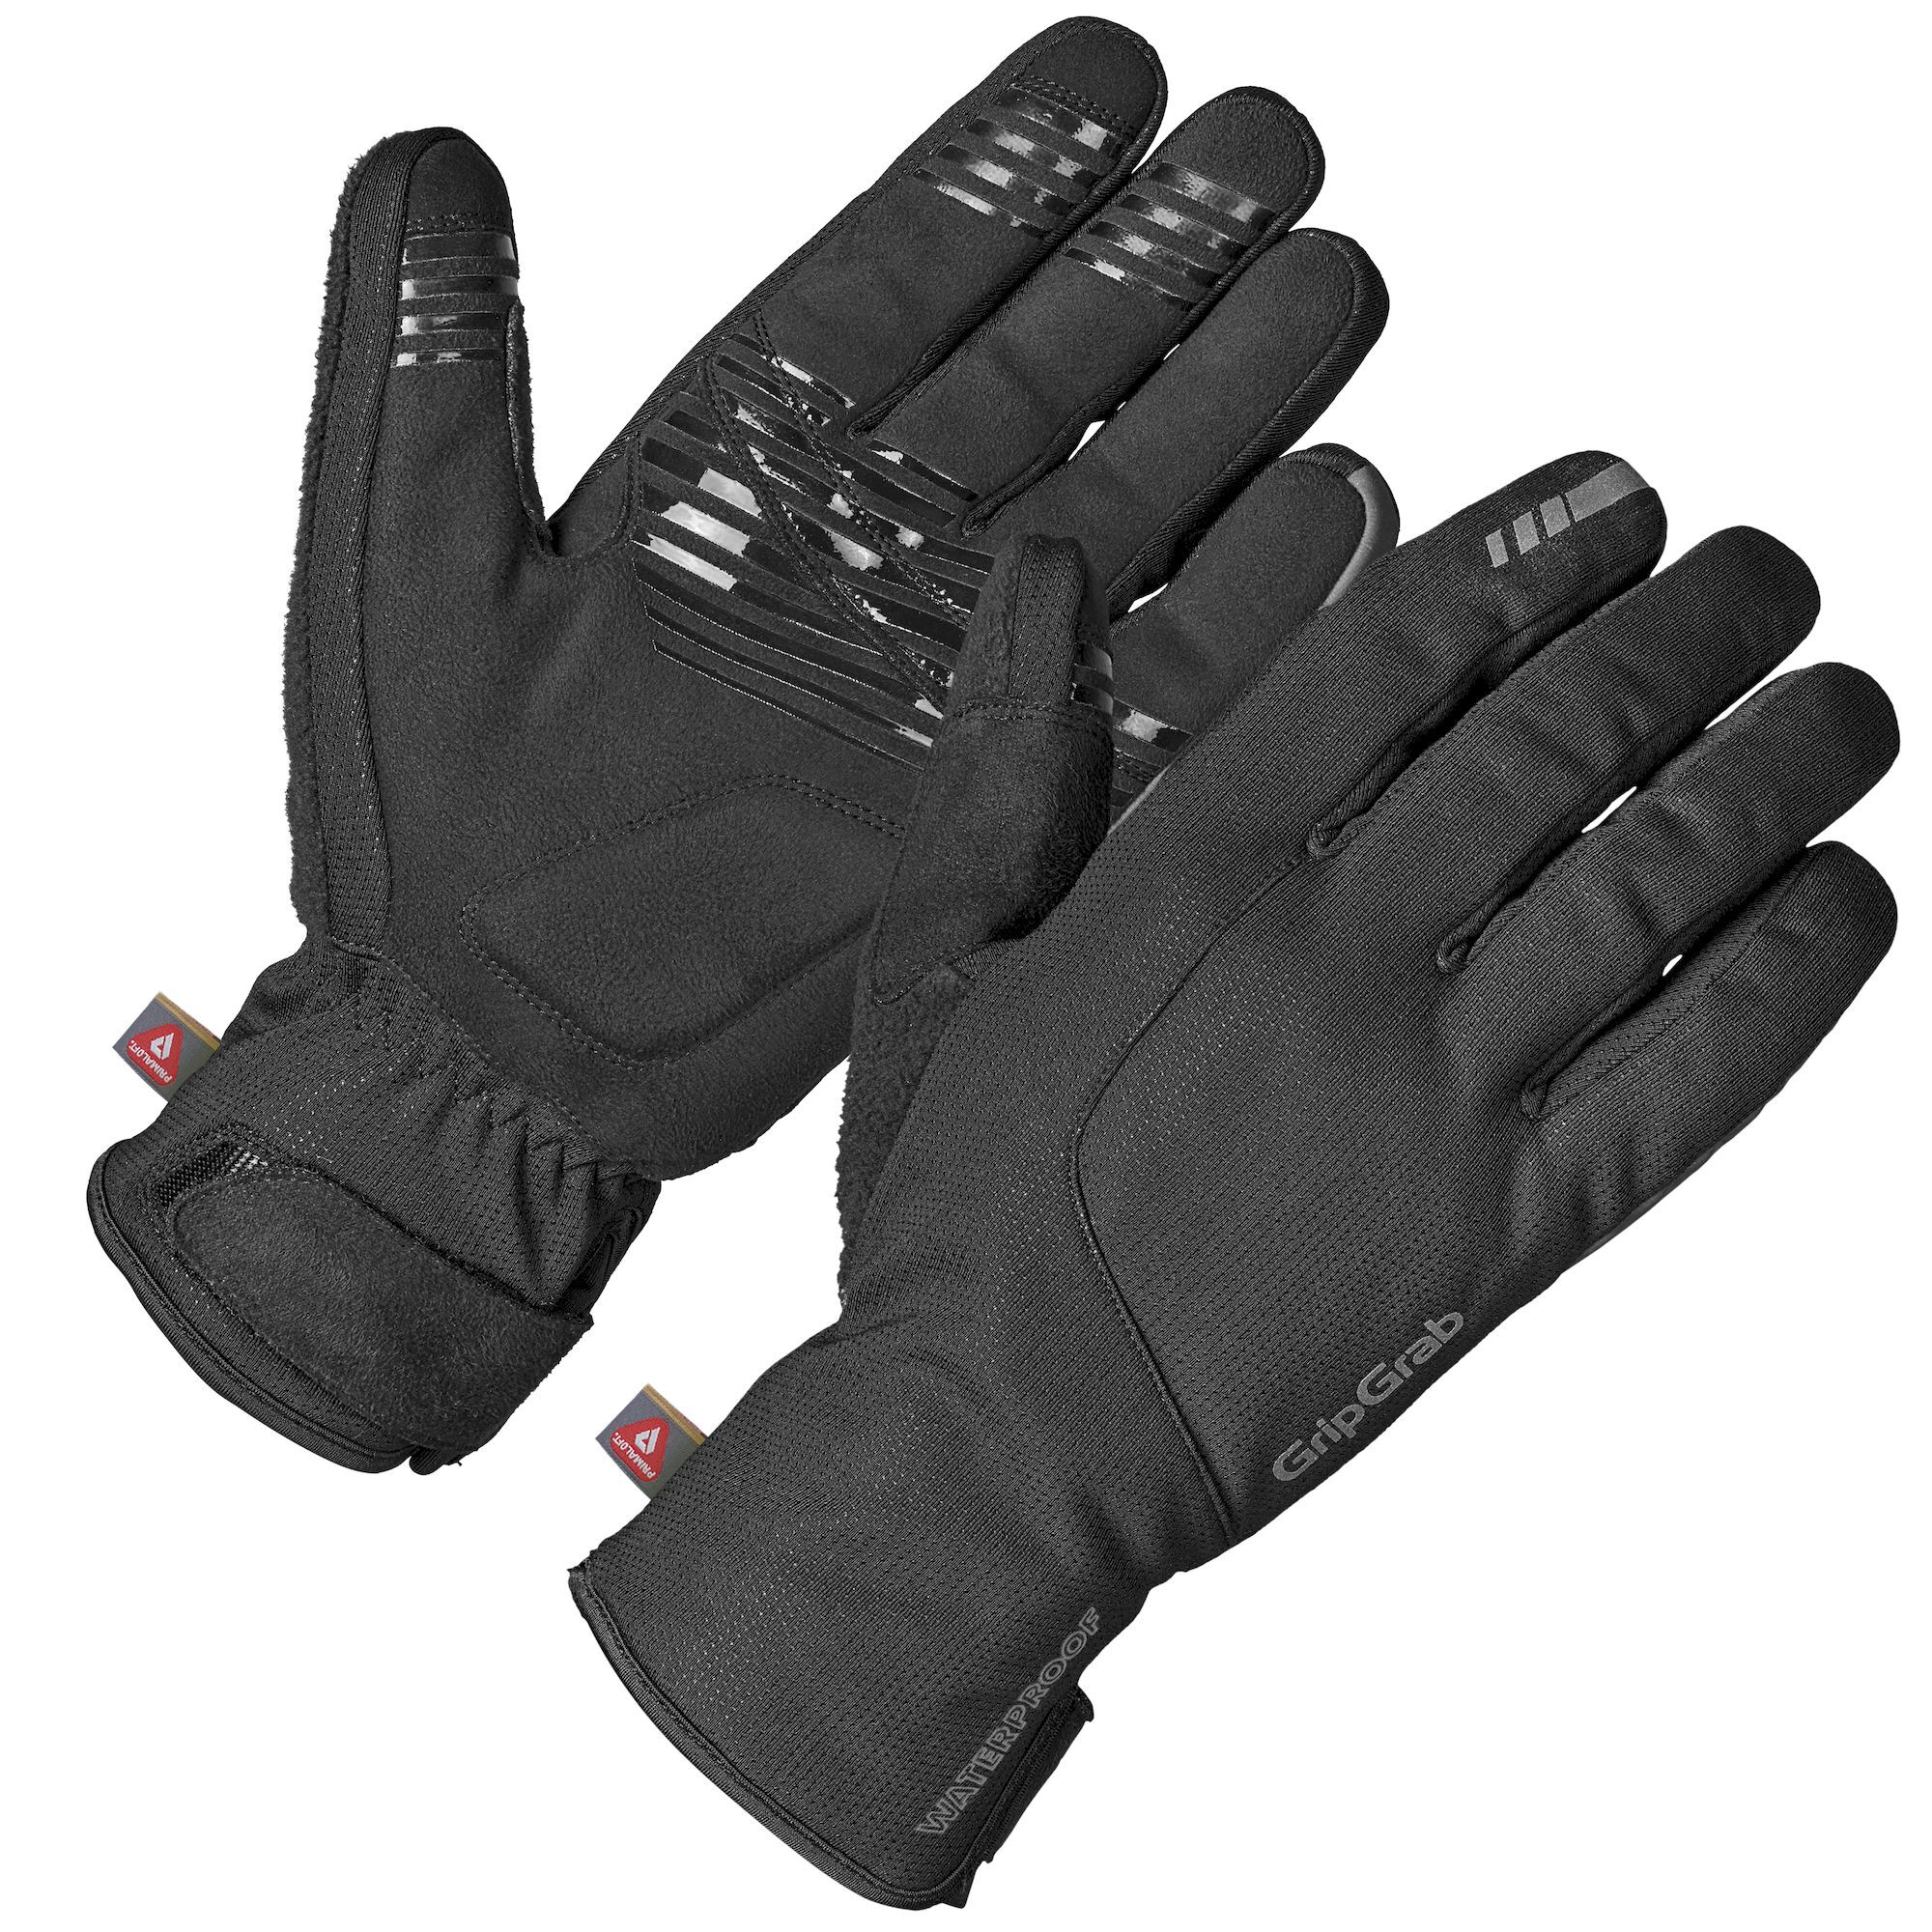 GripGrab Polaris 2 Waterproof Winter Gloves - Cycling gloves